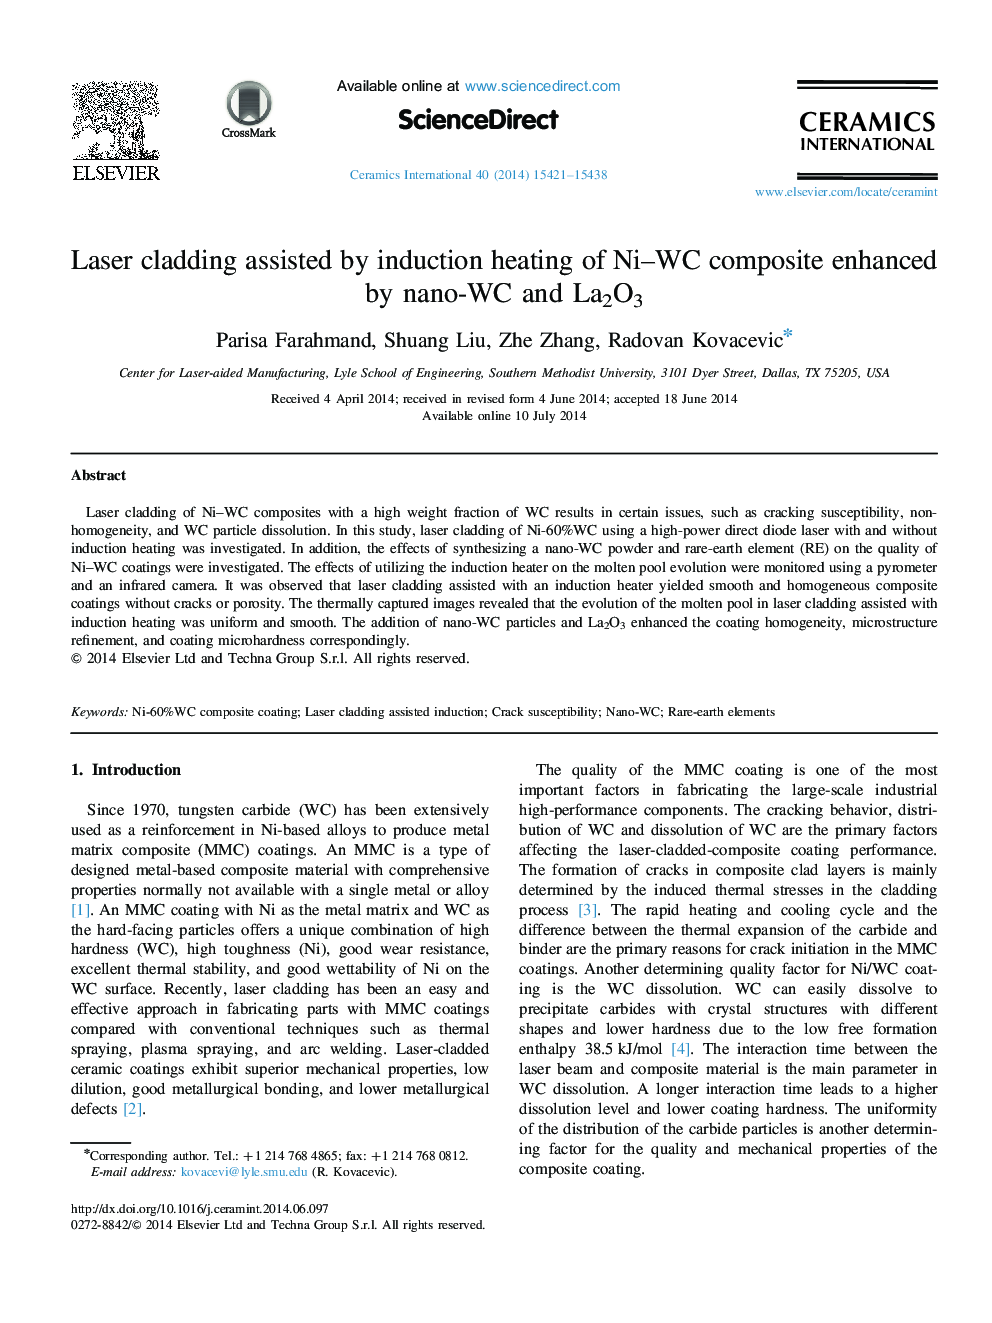 Laser cladding assisted by induction heating of Ni-WC composite enhanced by nano-WC and La2O3